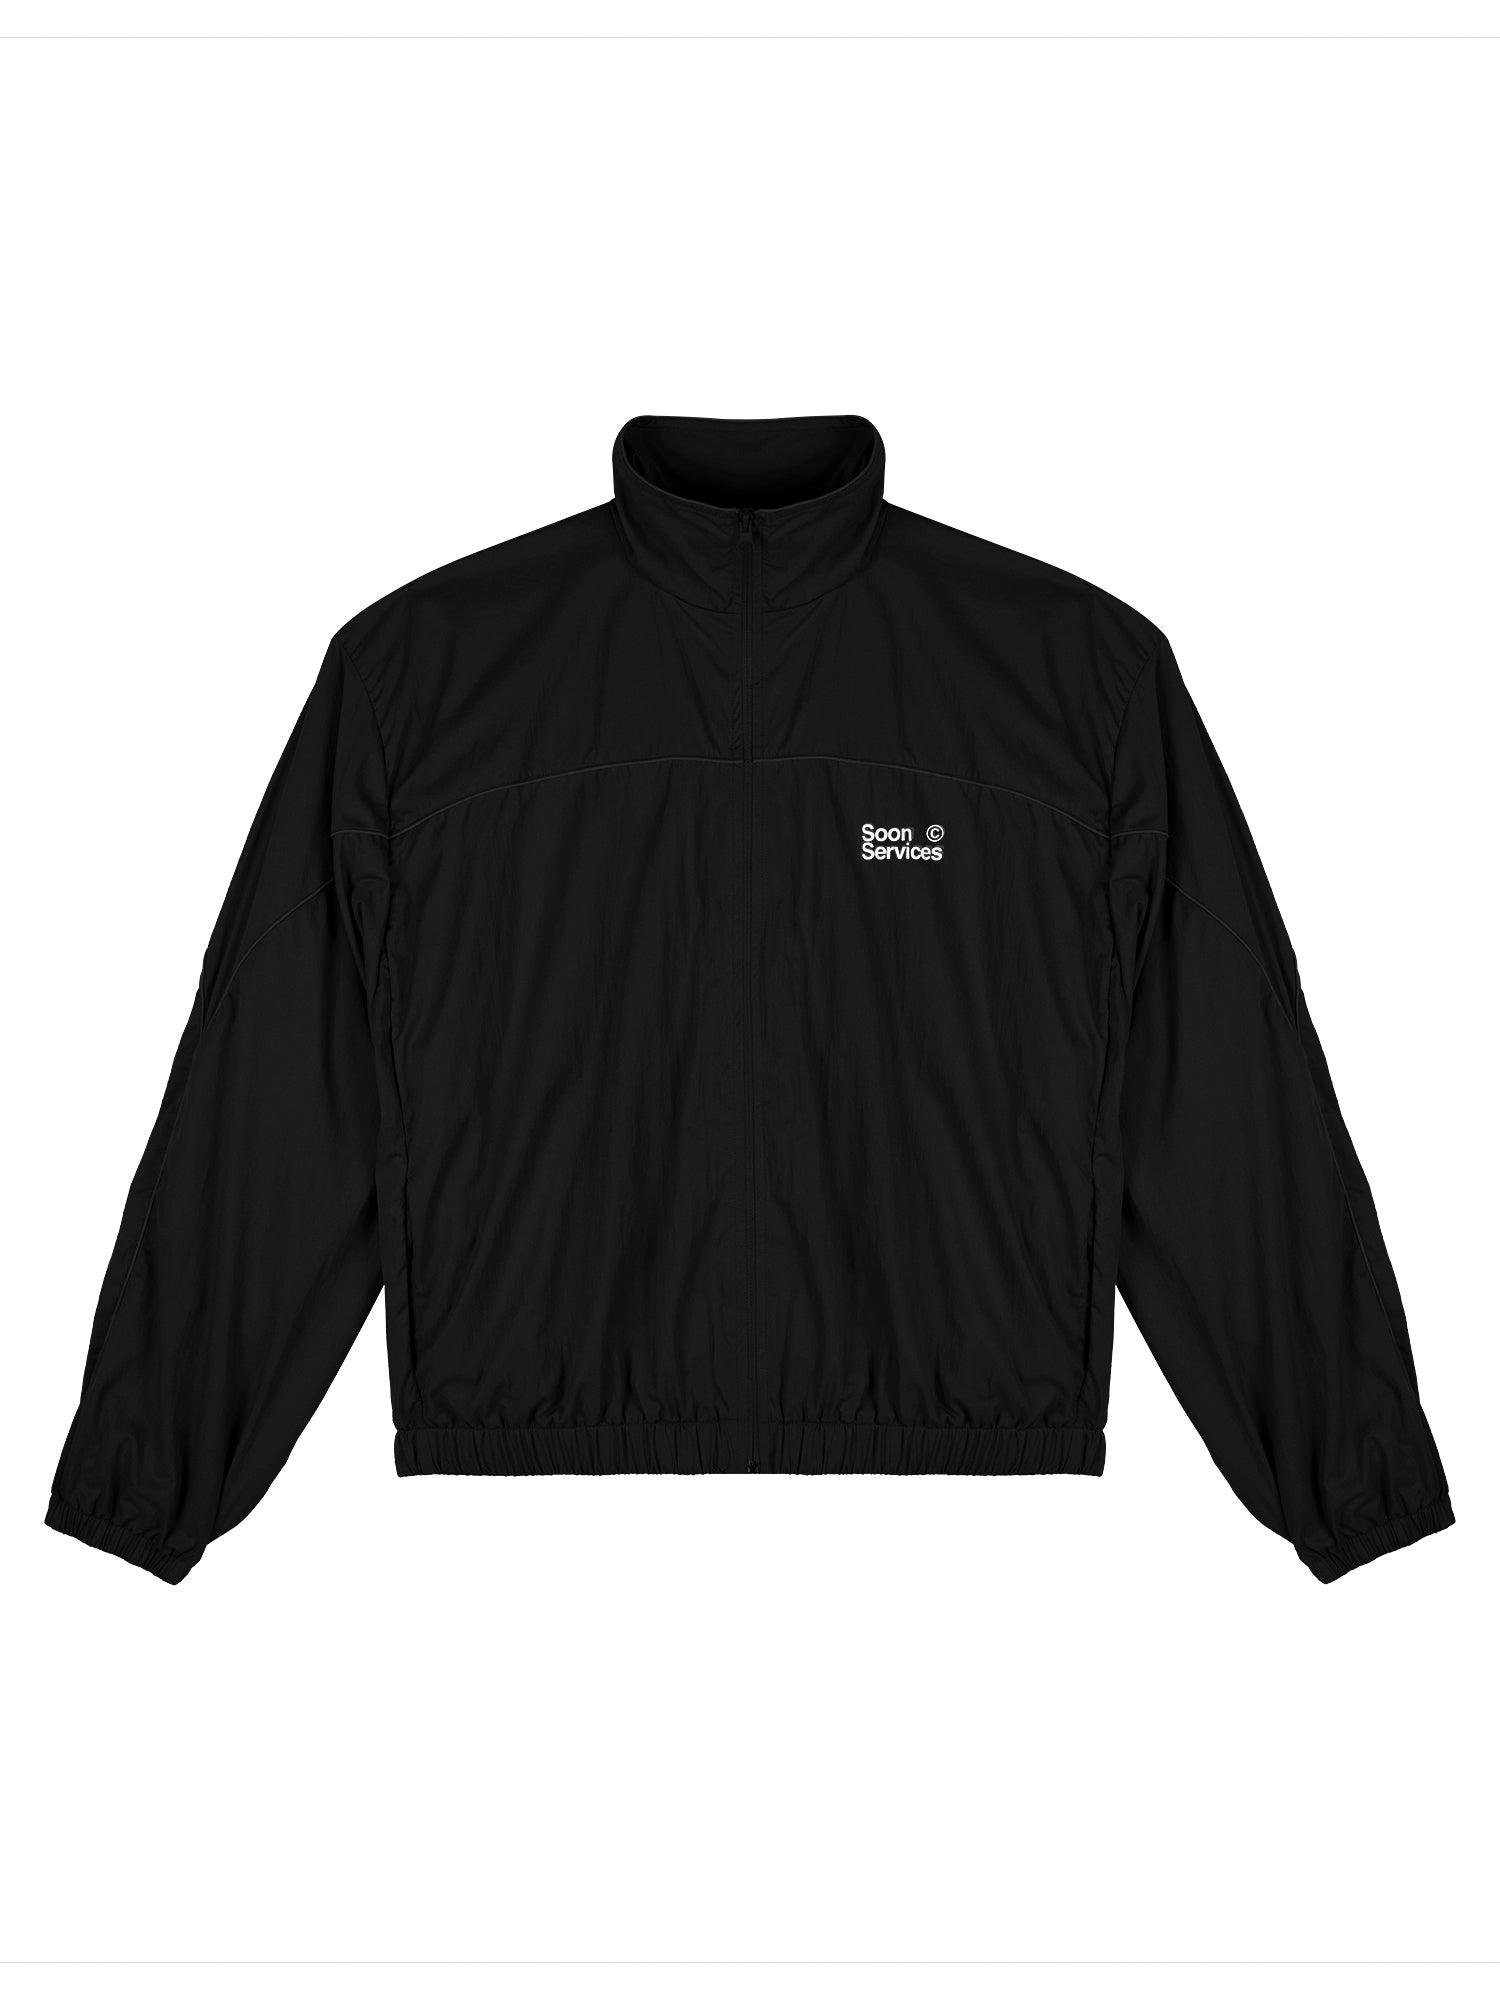 Soon Services Track Jacket - SOON TO BE ANNOUNCED